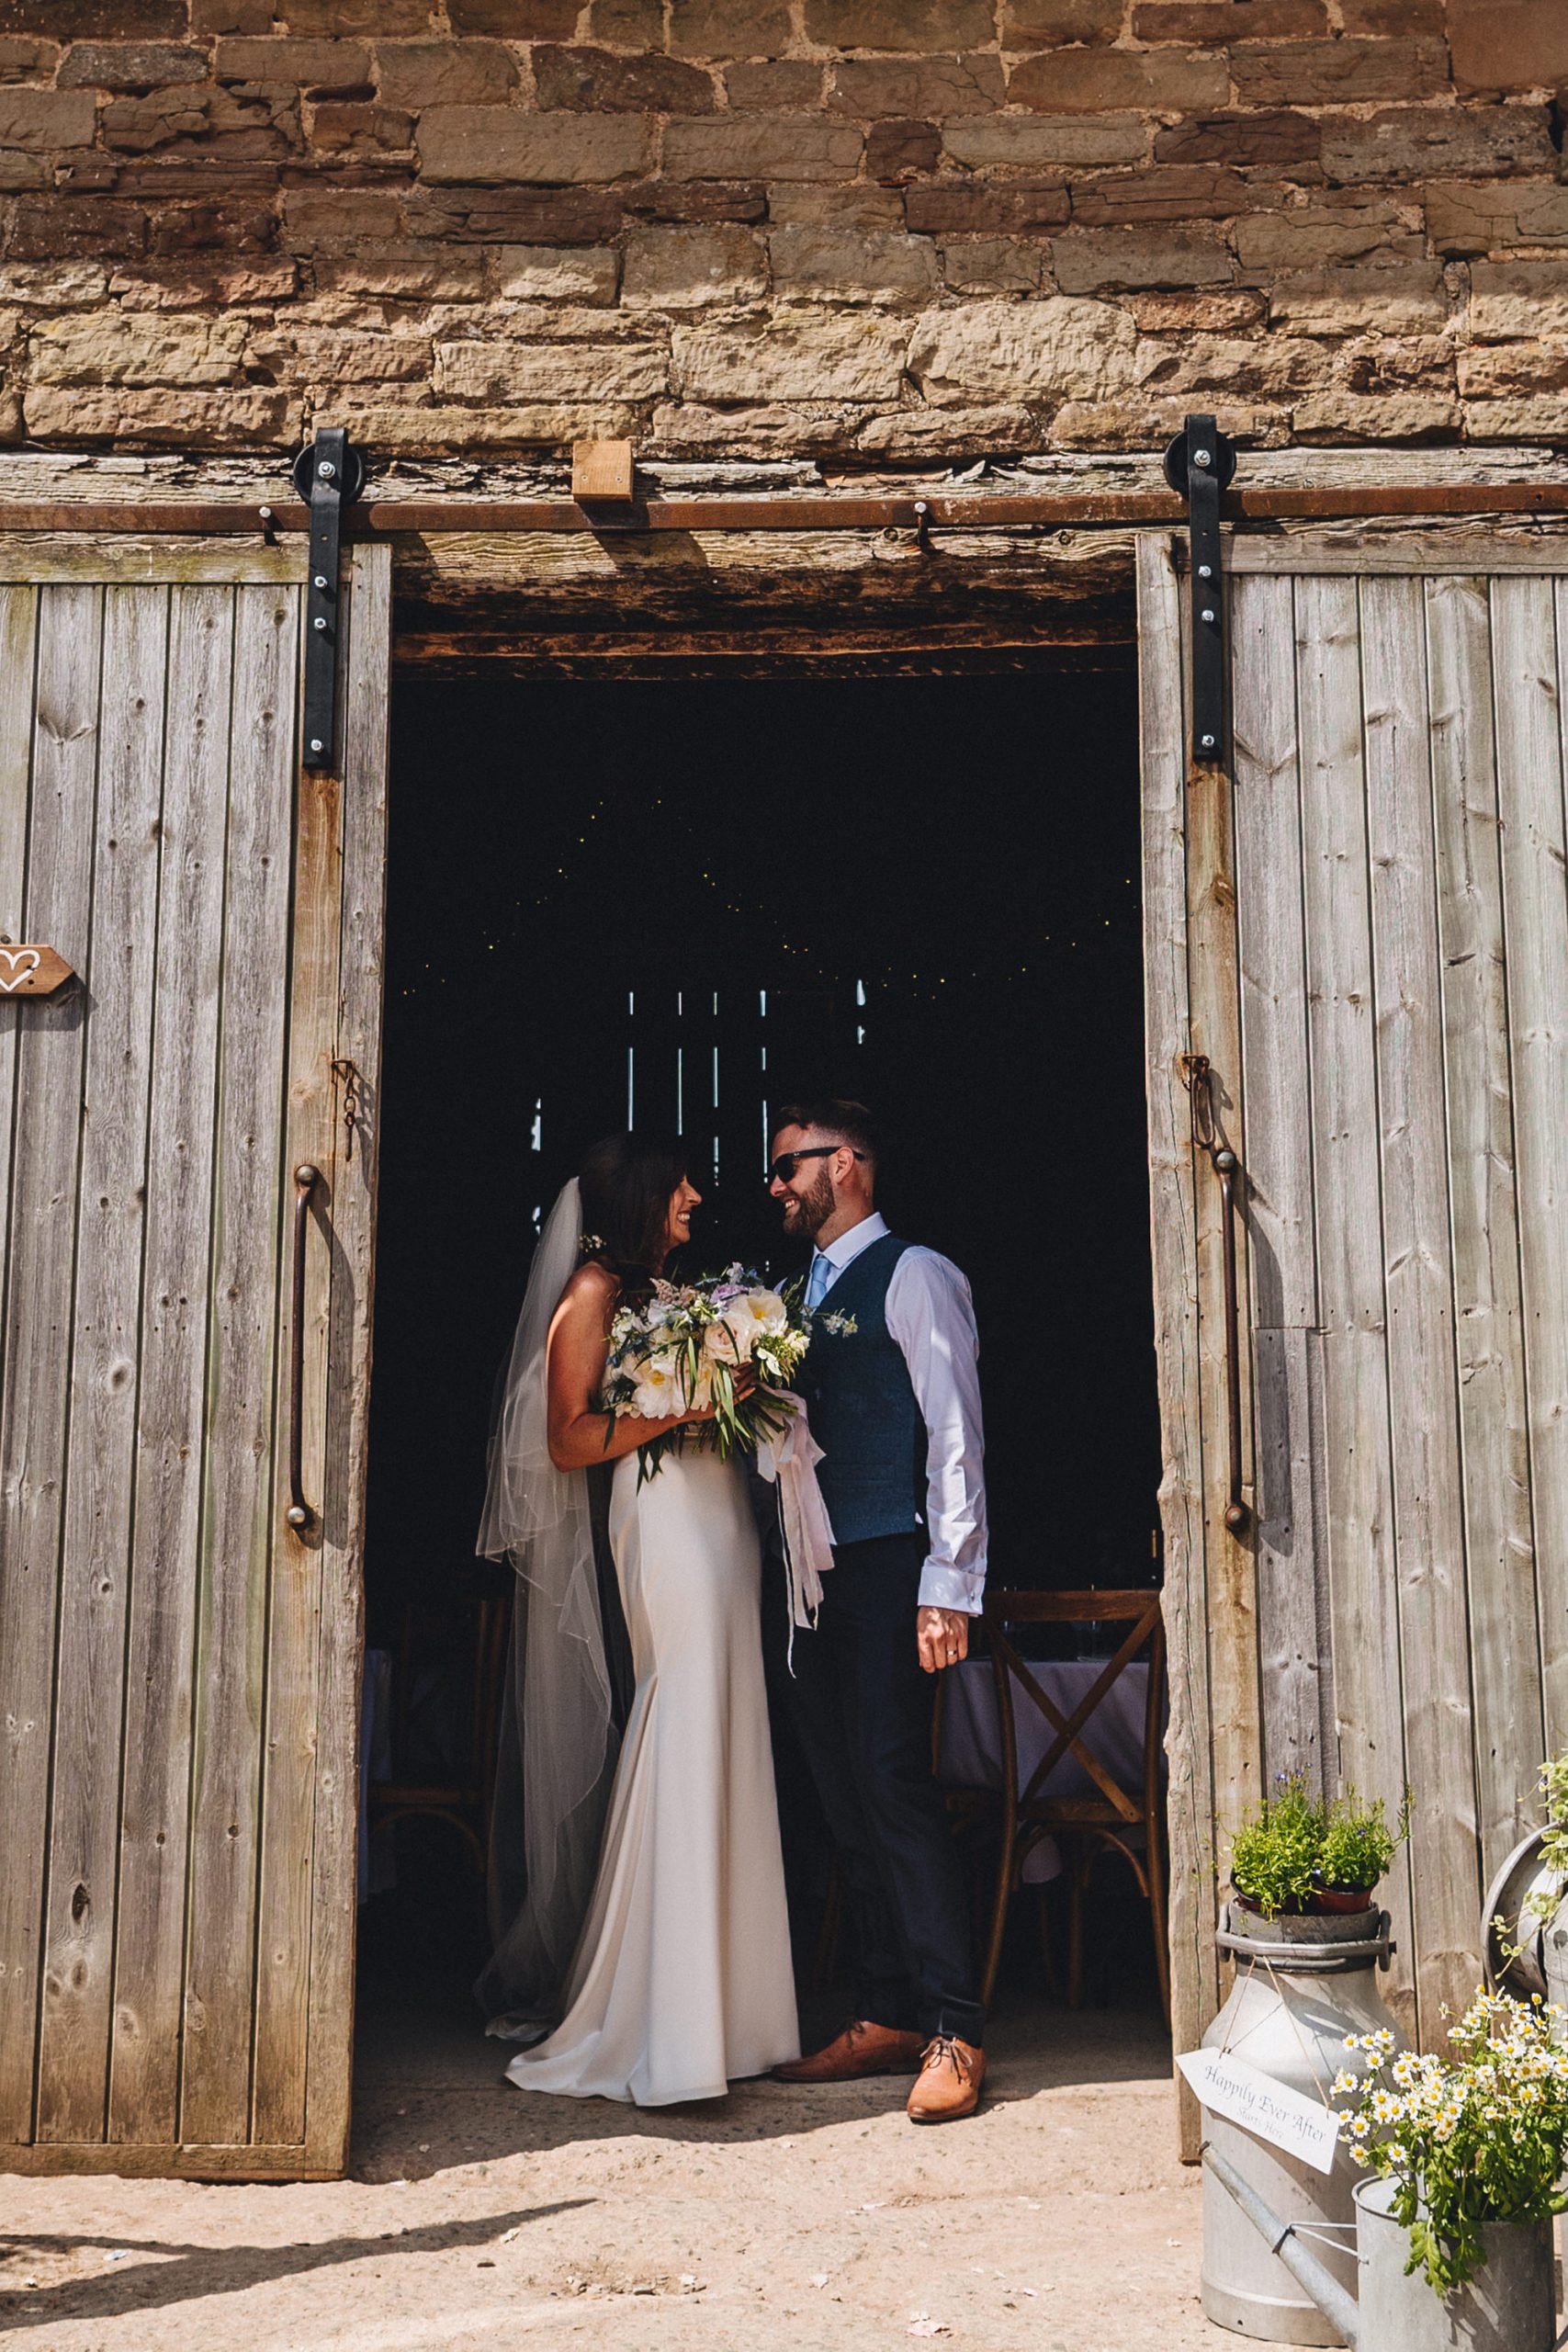 Kelly Will Rustic Country Wedding Marta May Photography SBS 023 scaled